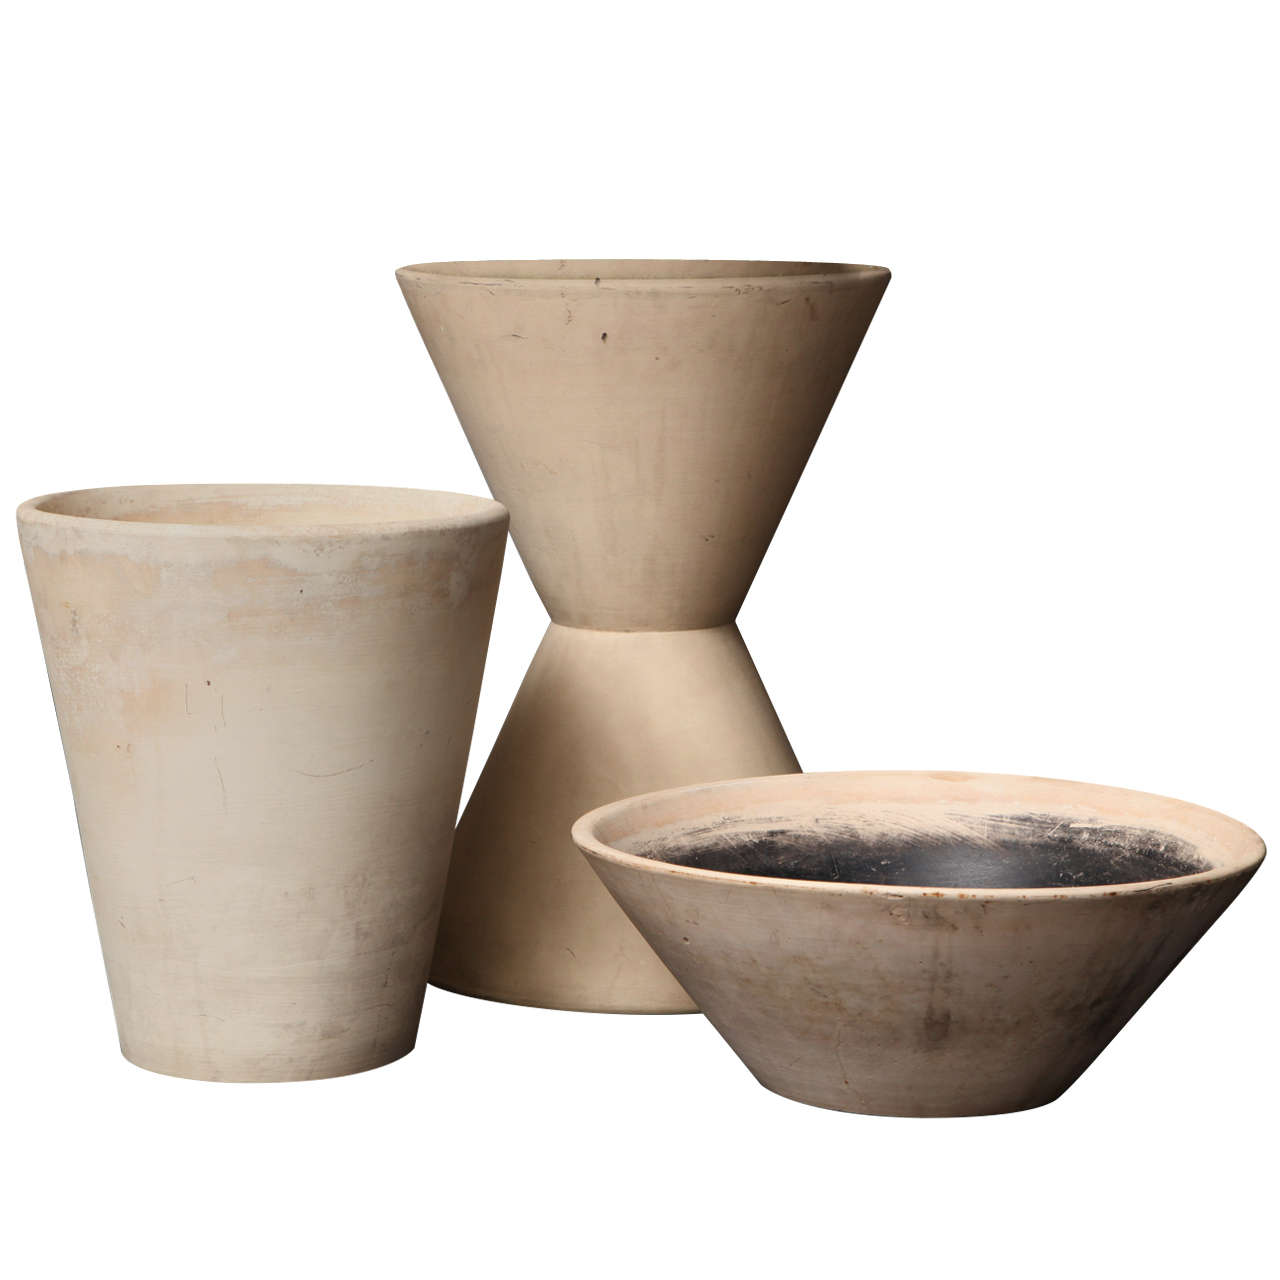 Architectural Pottery For Sale